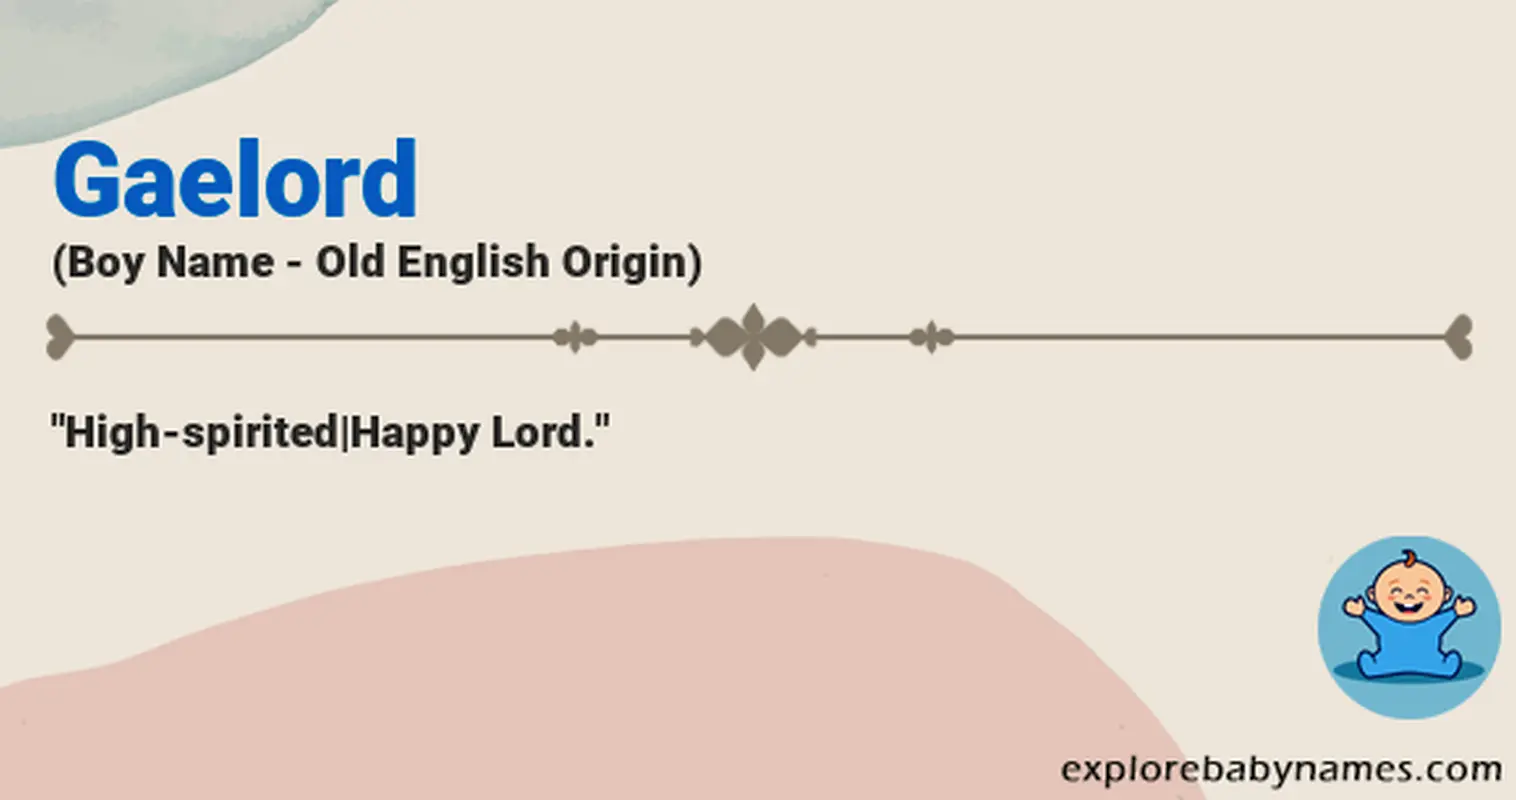 Meaning of Gaelord